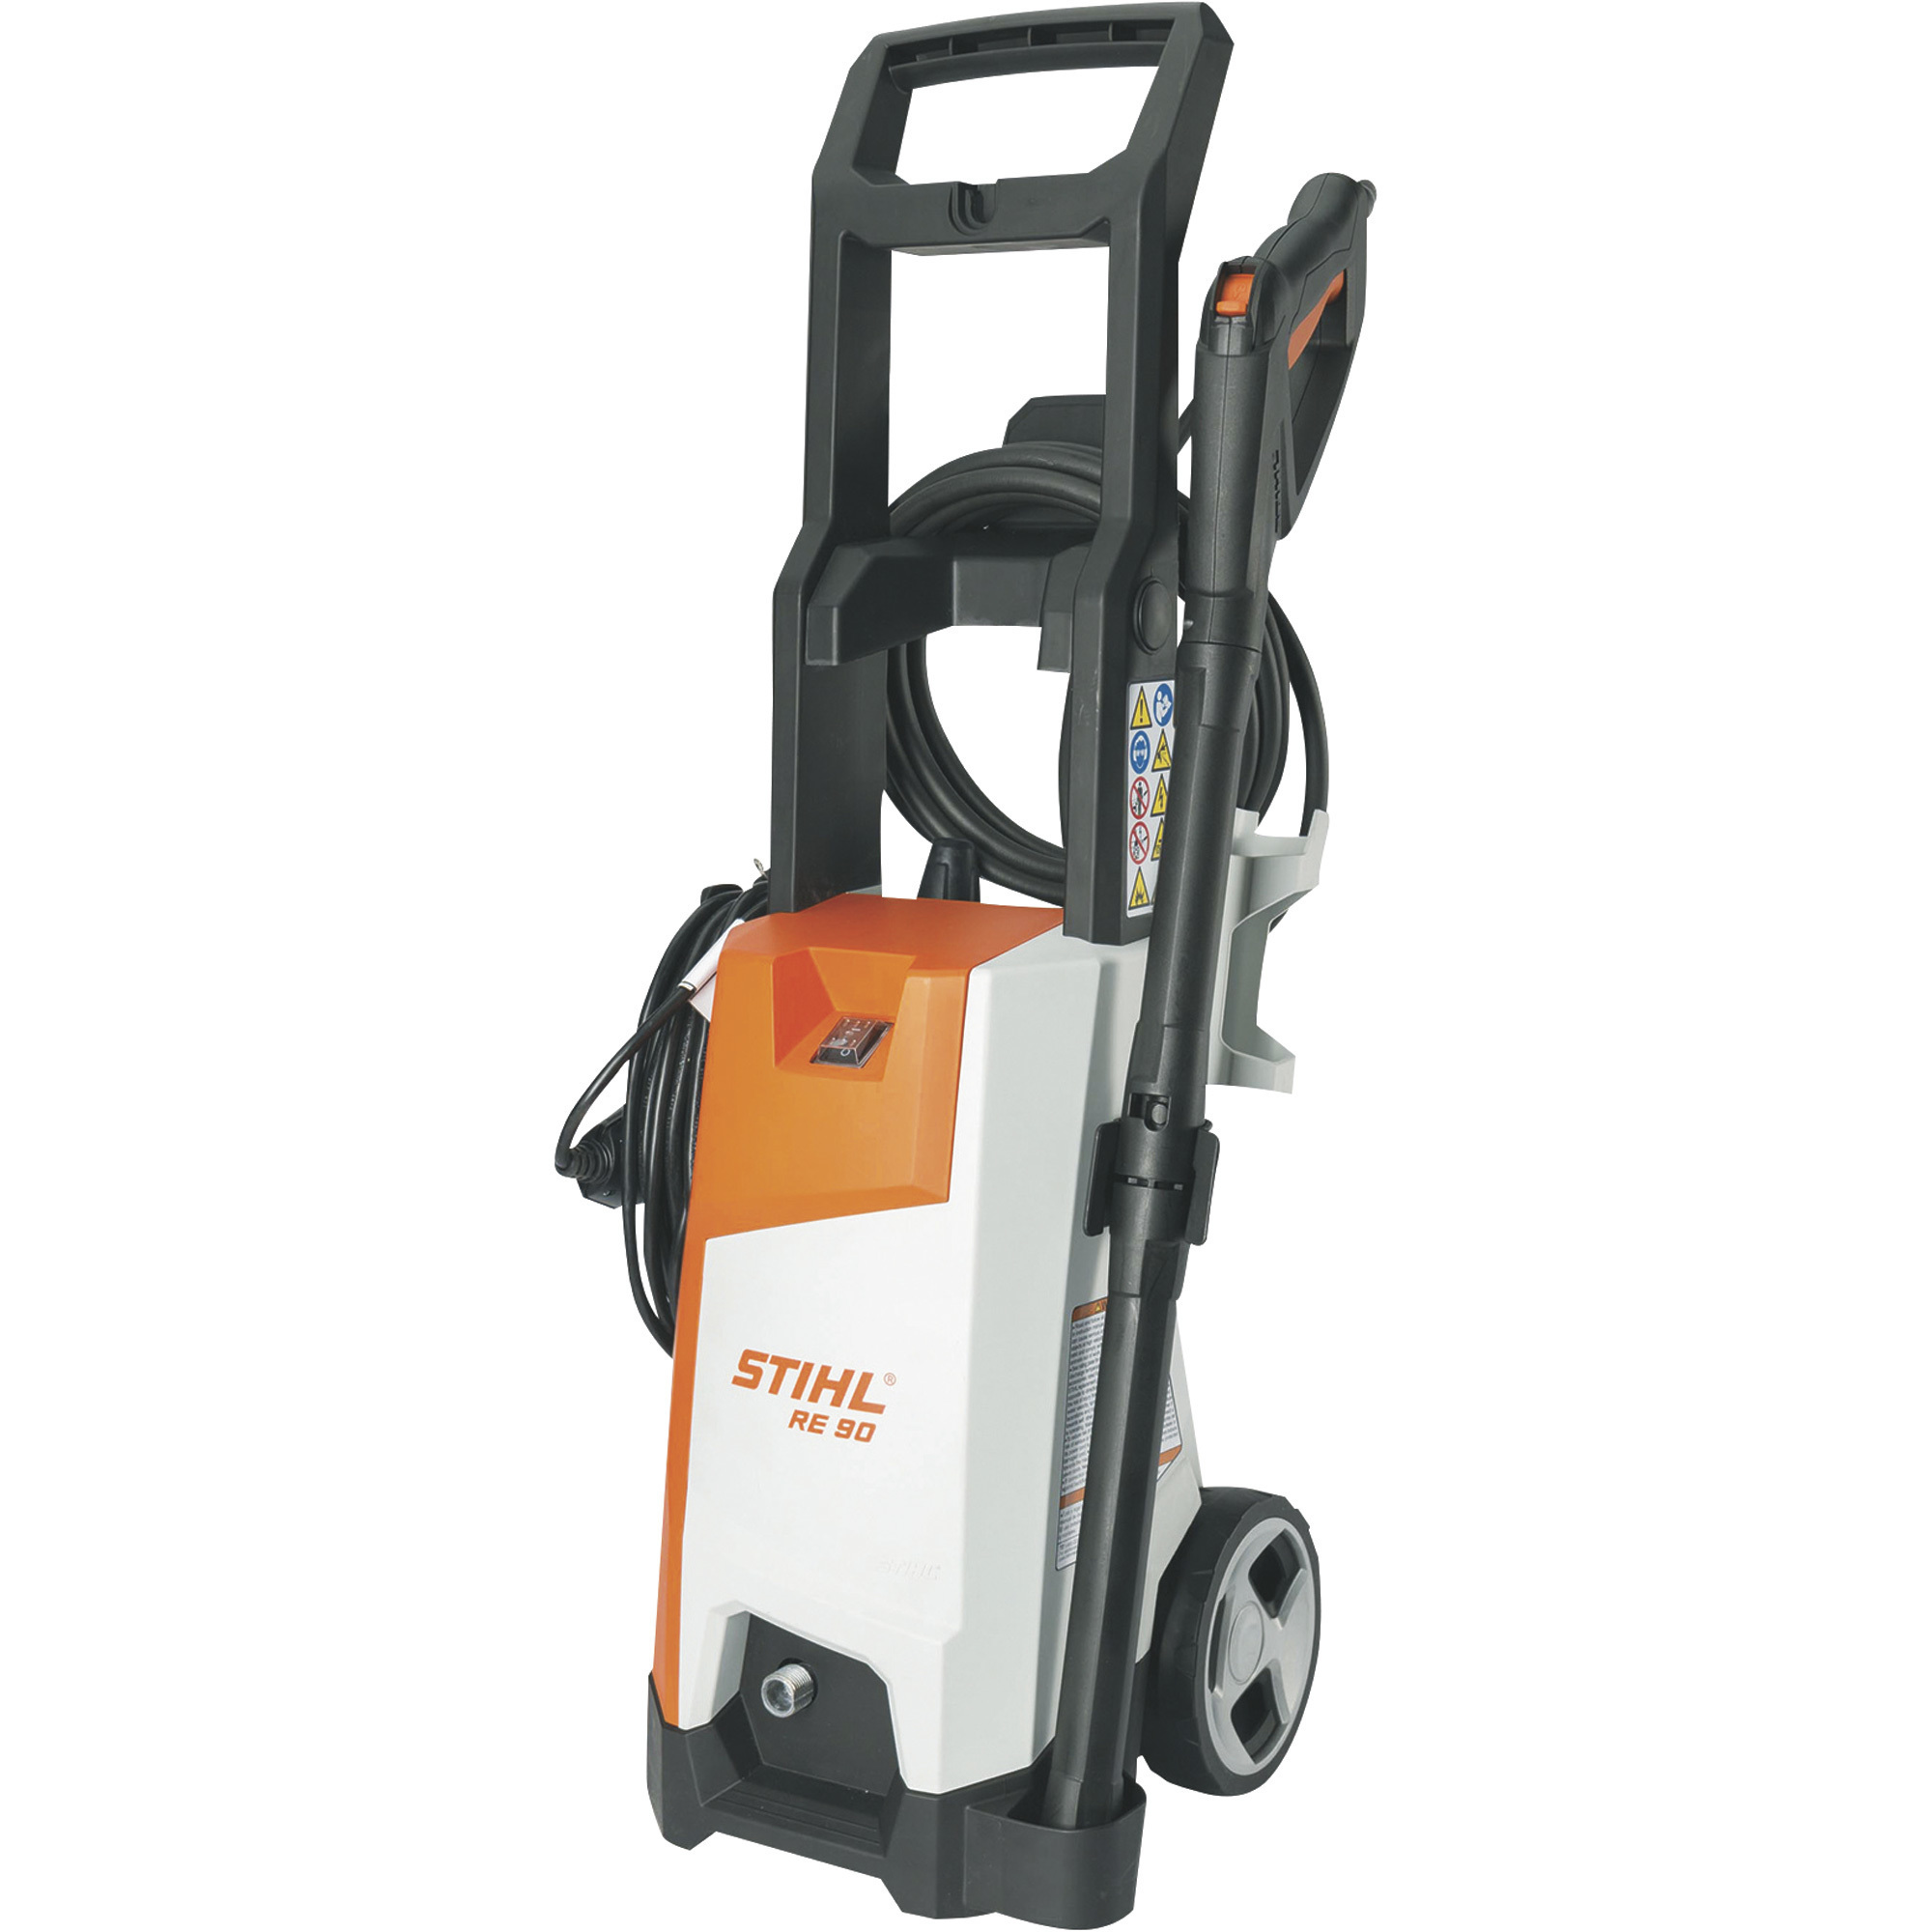 STIHL Electric Cold Water Pressure Washer — 1800 PSI, 1.2 GPM, 120 Volt, Model RE 90 -  RE020114523US